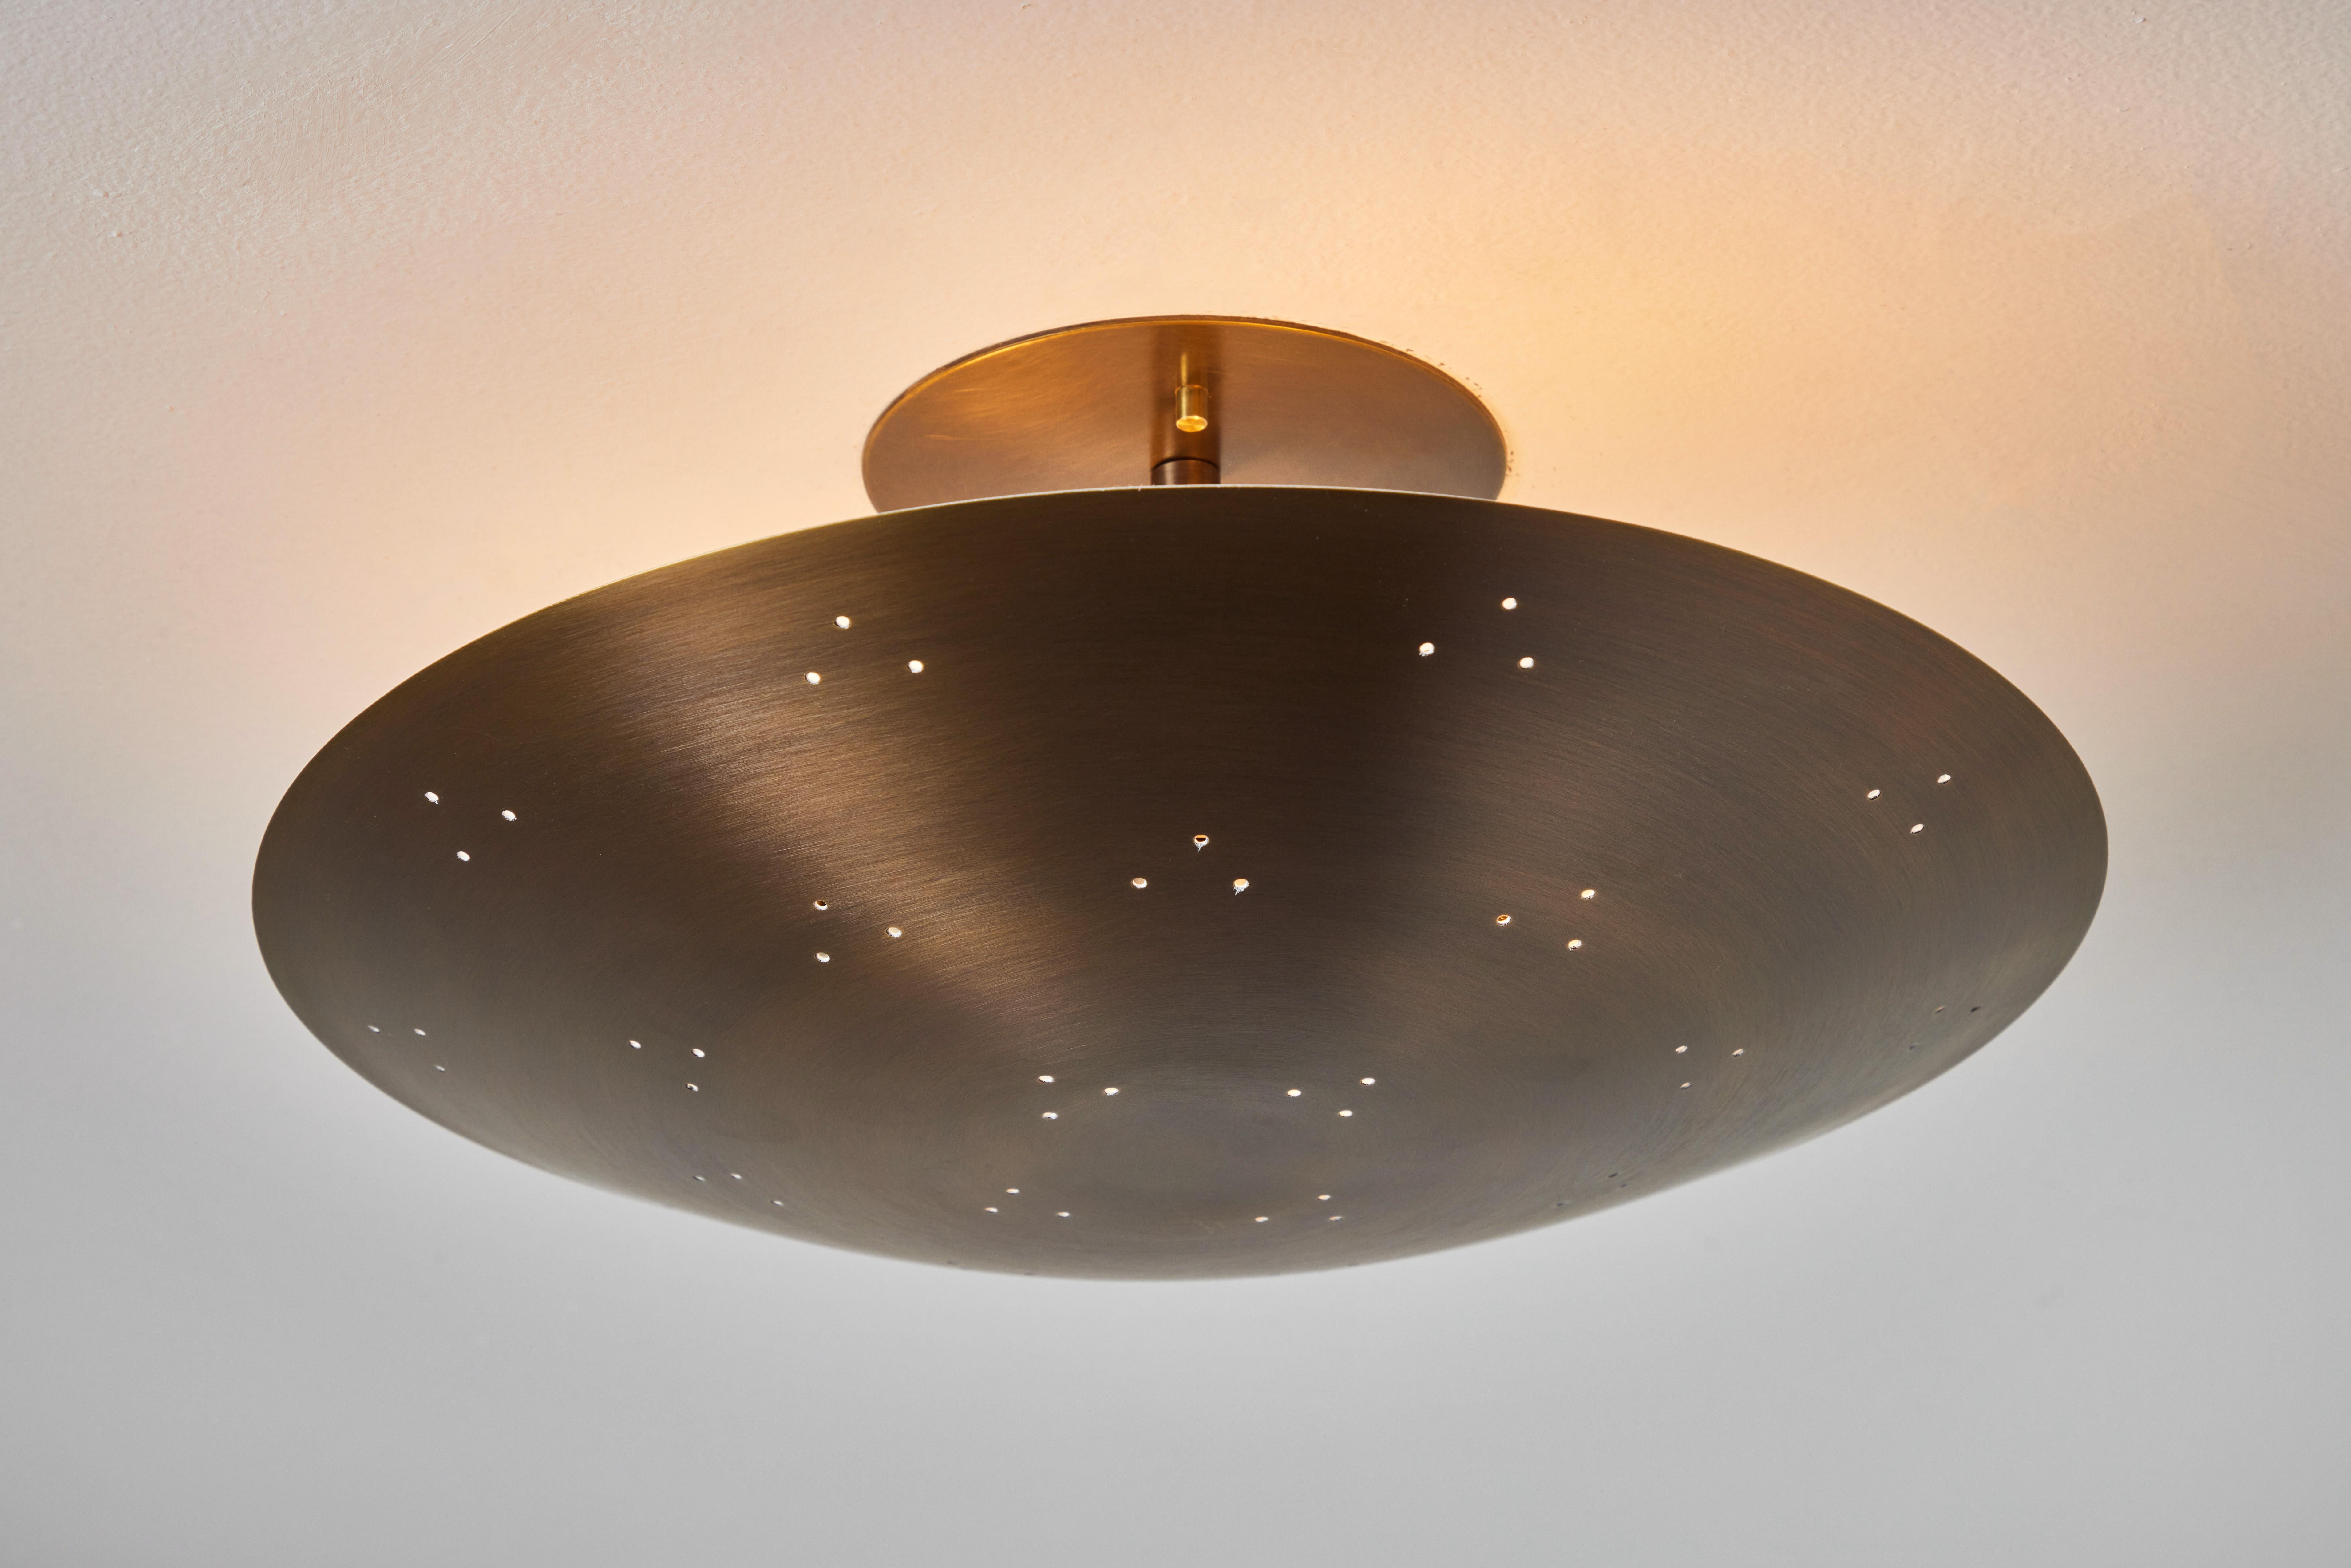 Two Enlighten 'Rey' Perforated Patinated Brass Dome Ceiling Lamp In New Condition For Sale In Glendale, CA